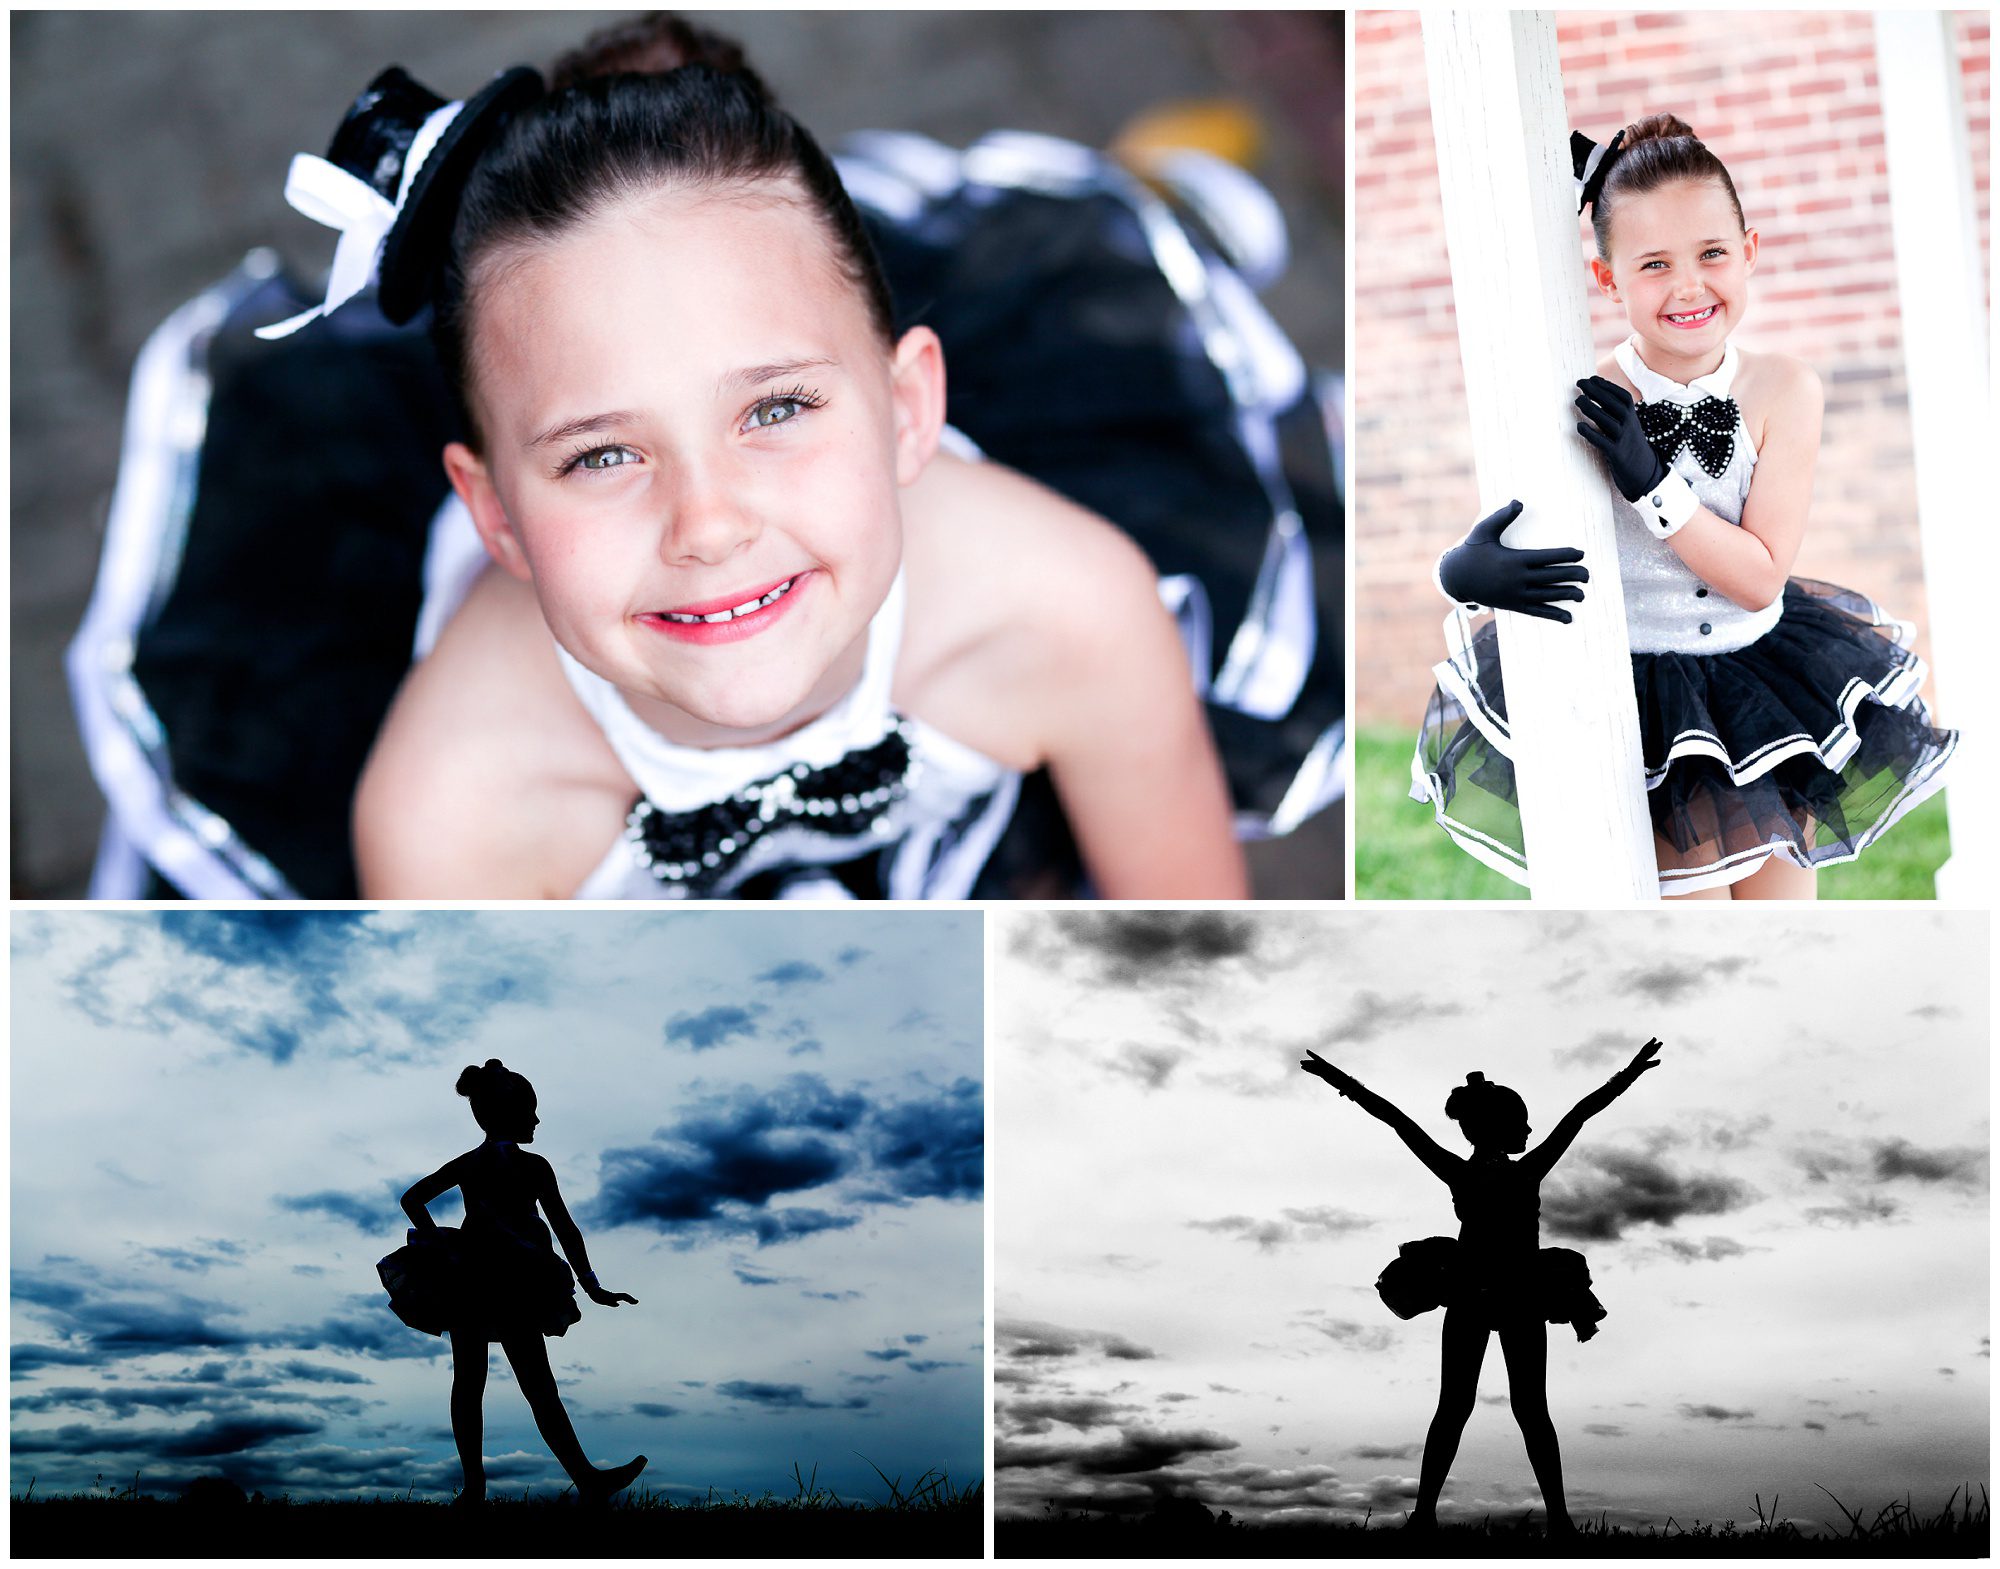 fluvanna tap dancer costume portraits pleasant grove recital spring sparkle cute tapping pictures photographer adorable. silhouette sunset